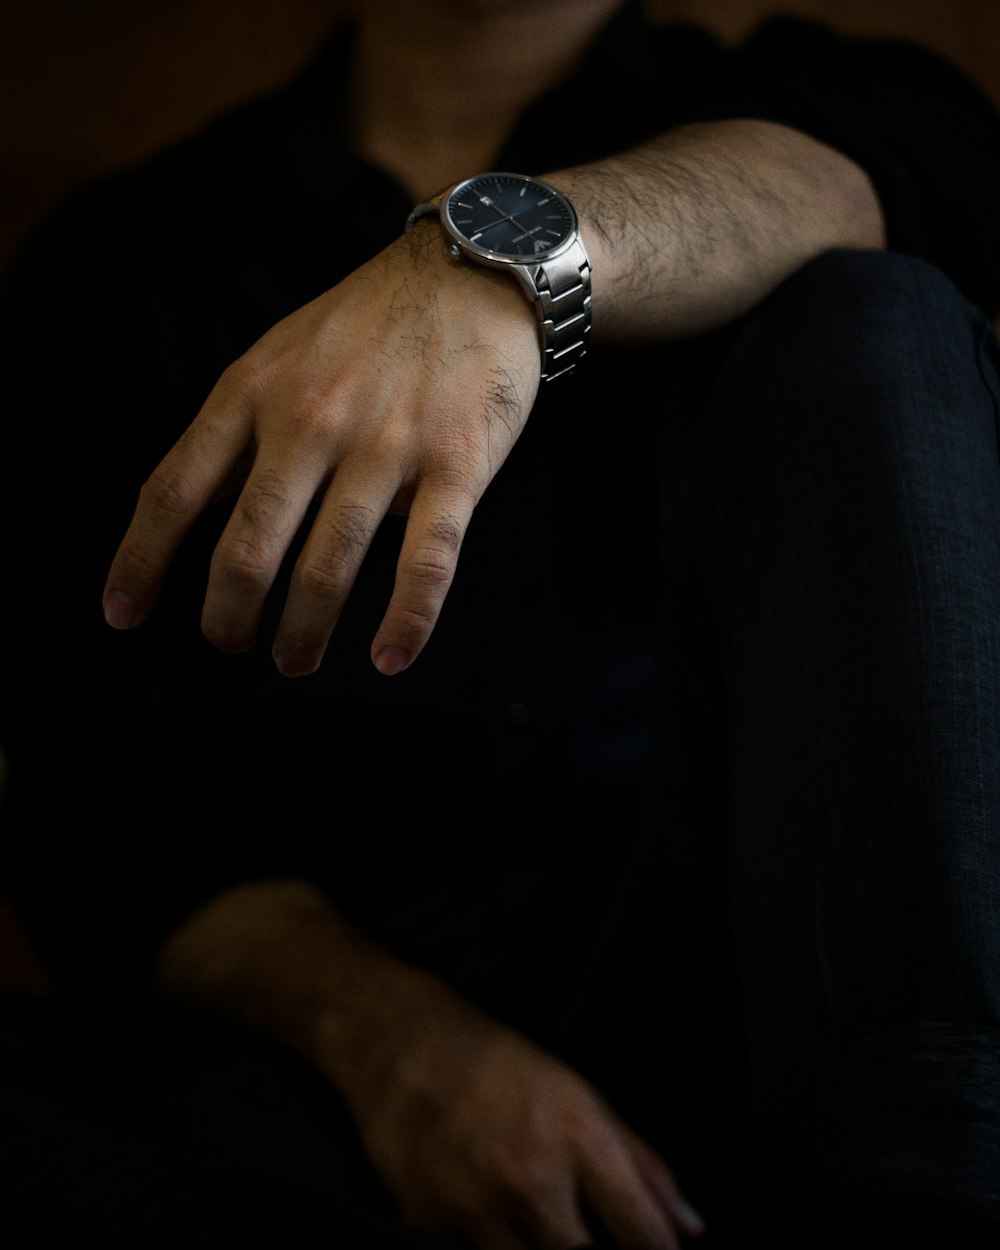 person wearing silver round analog watch